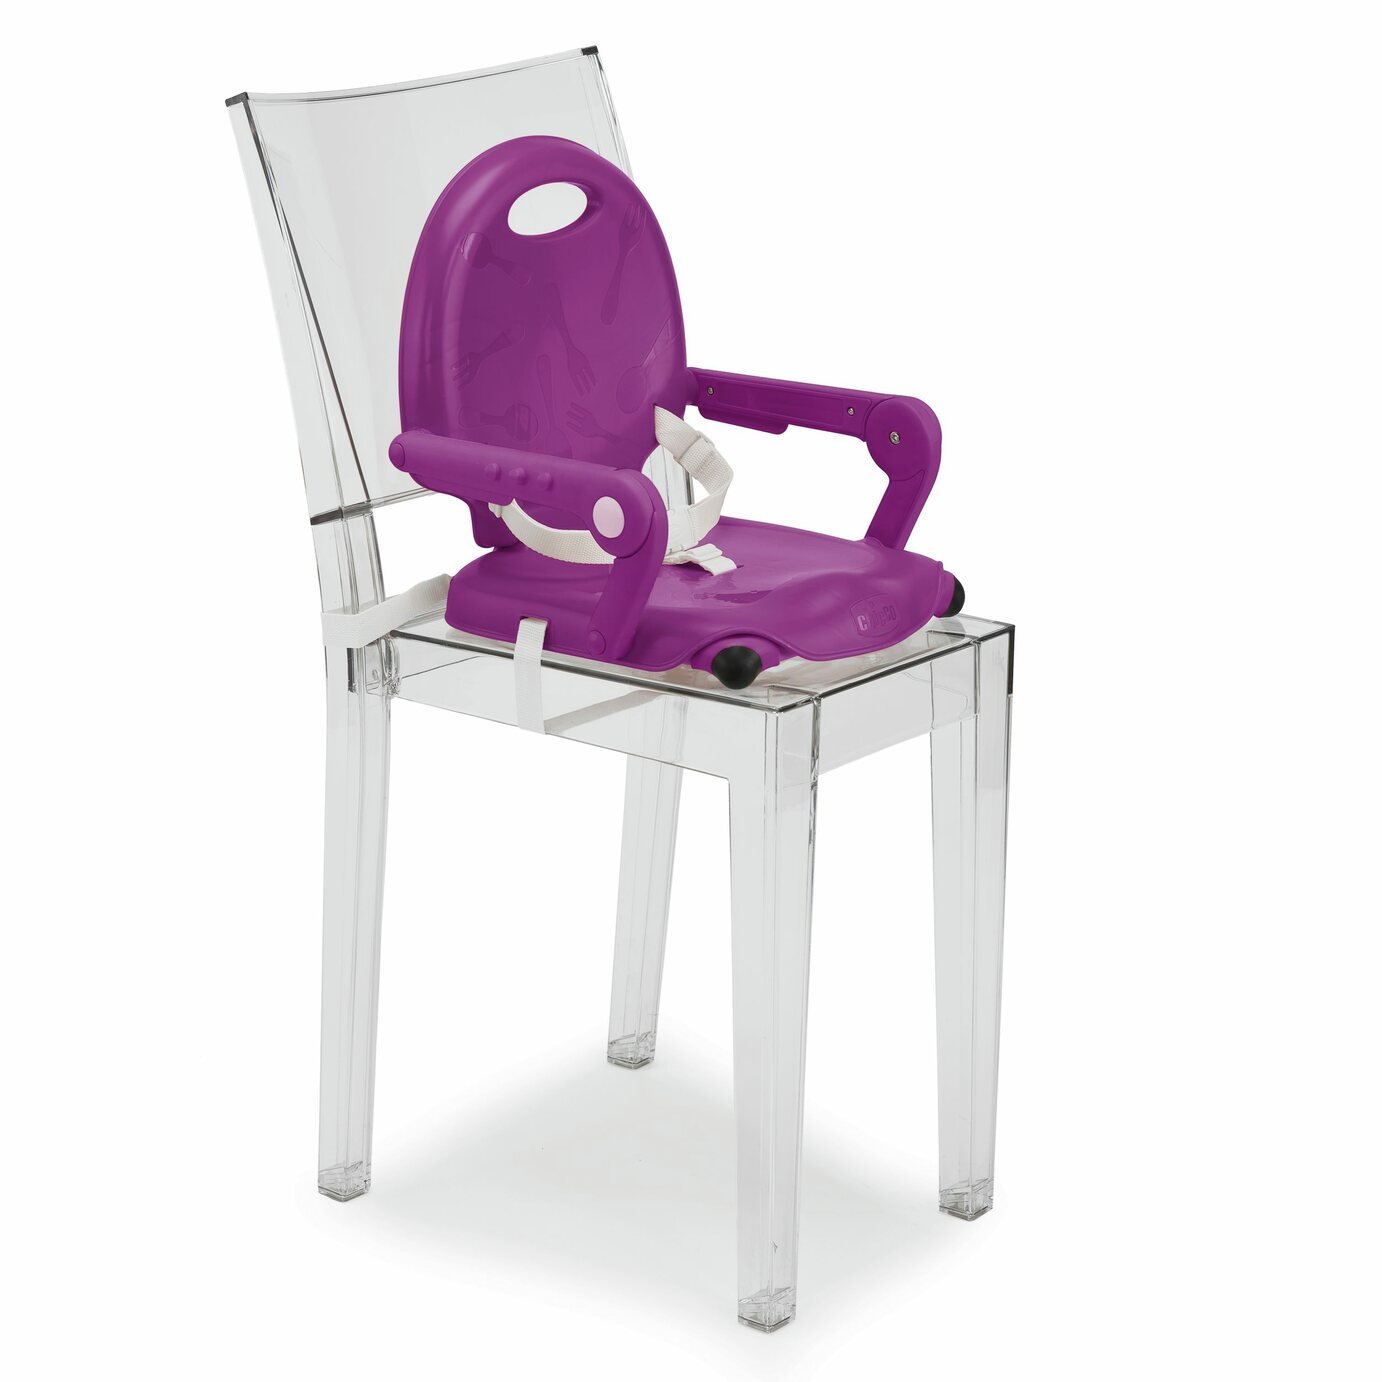 Chicco Pocket Snack Violetta Booster Seat Review